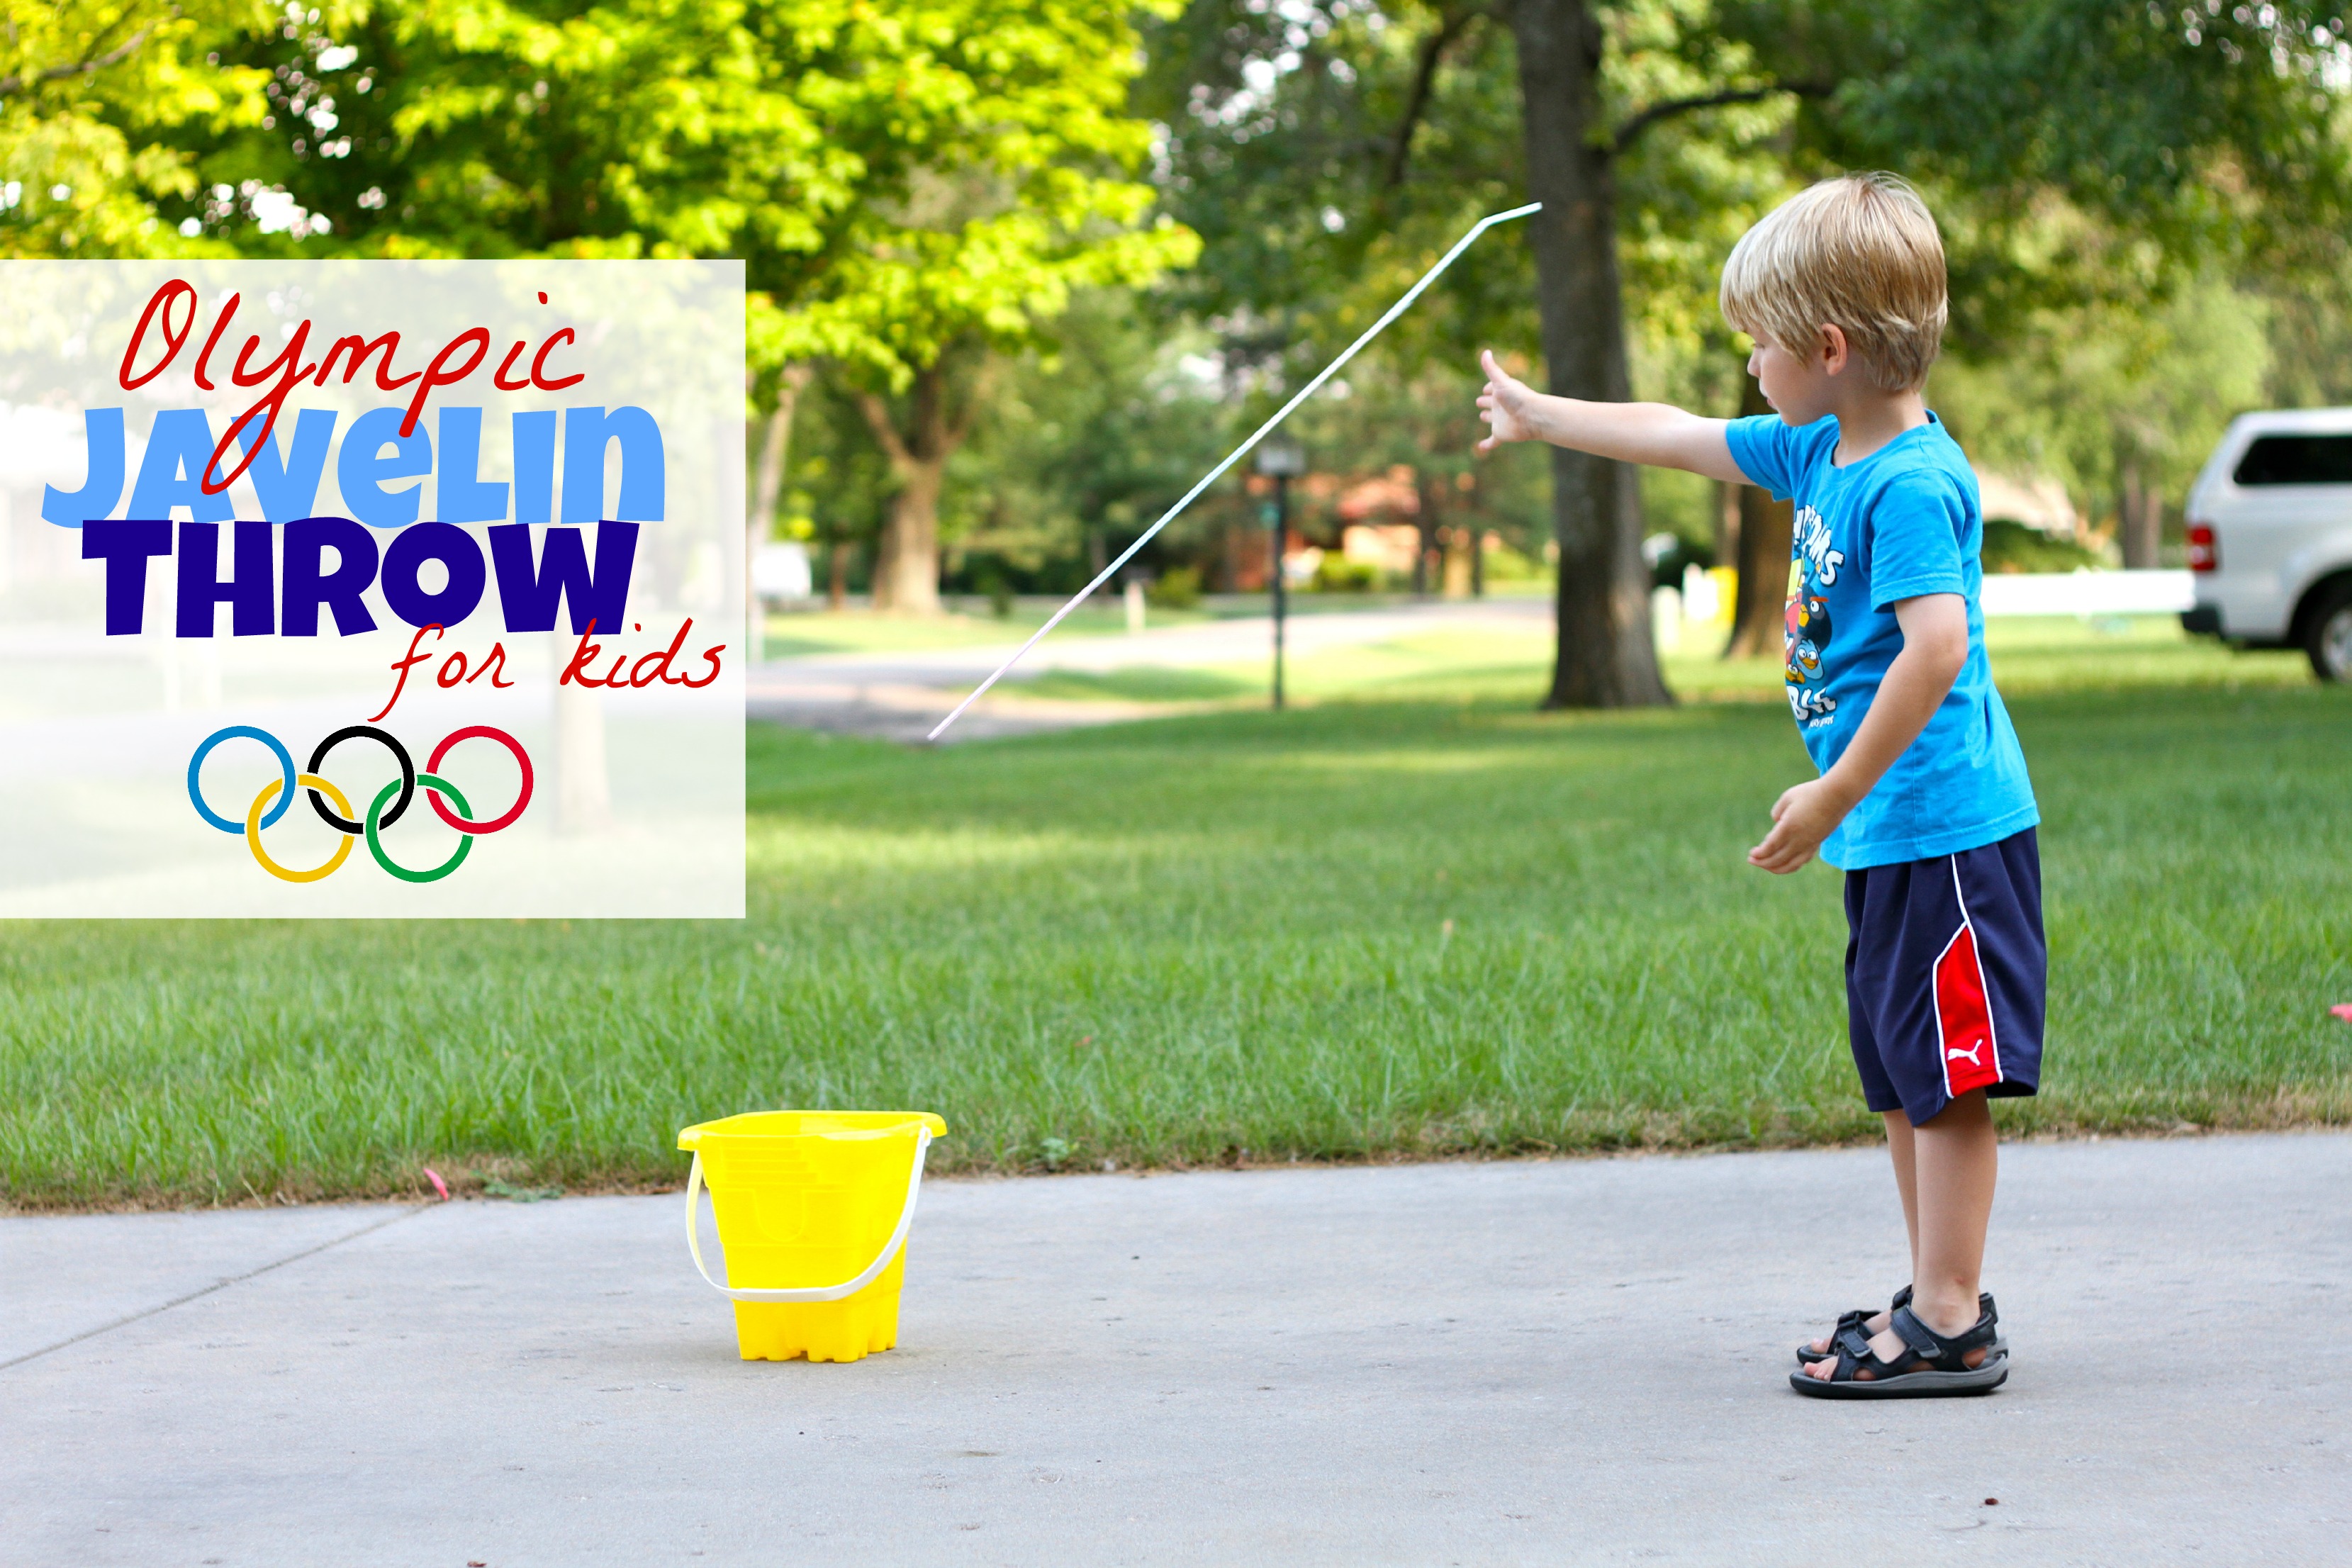 Throw object. Throw игра. Throw Sandbags. Olympic throwing games. Olympic games activities for Kids.